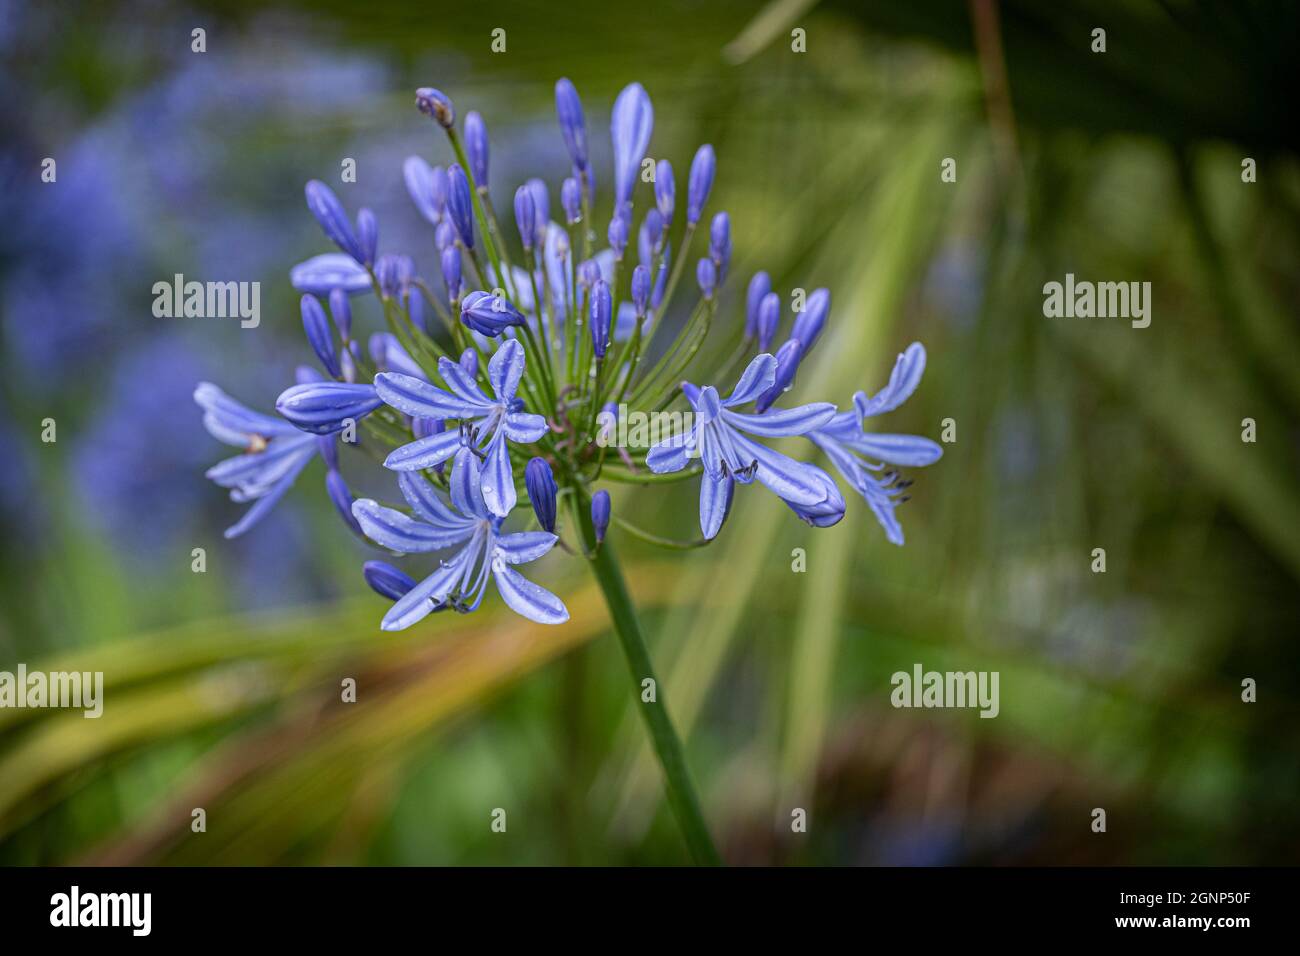 The fragile delicate flowers of the Agapanthus plant in a garden. Stock Photo